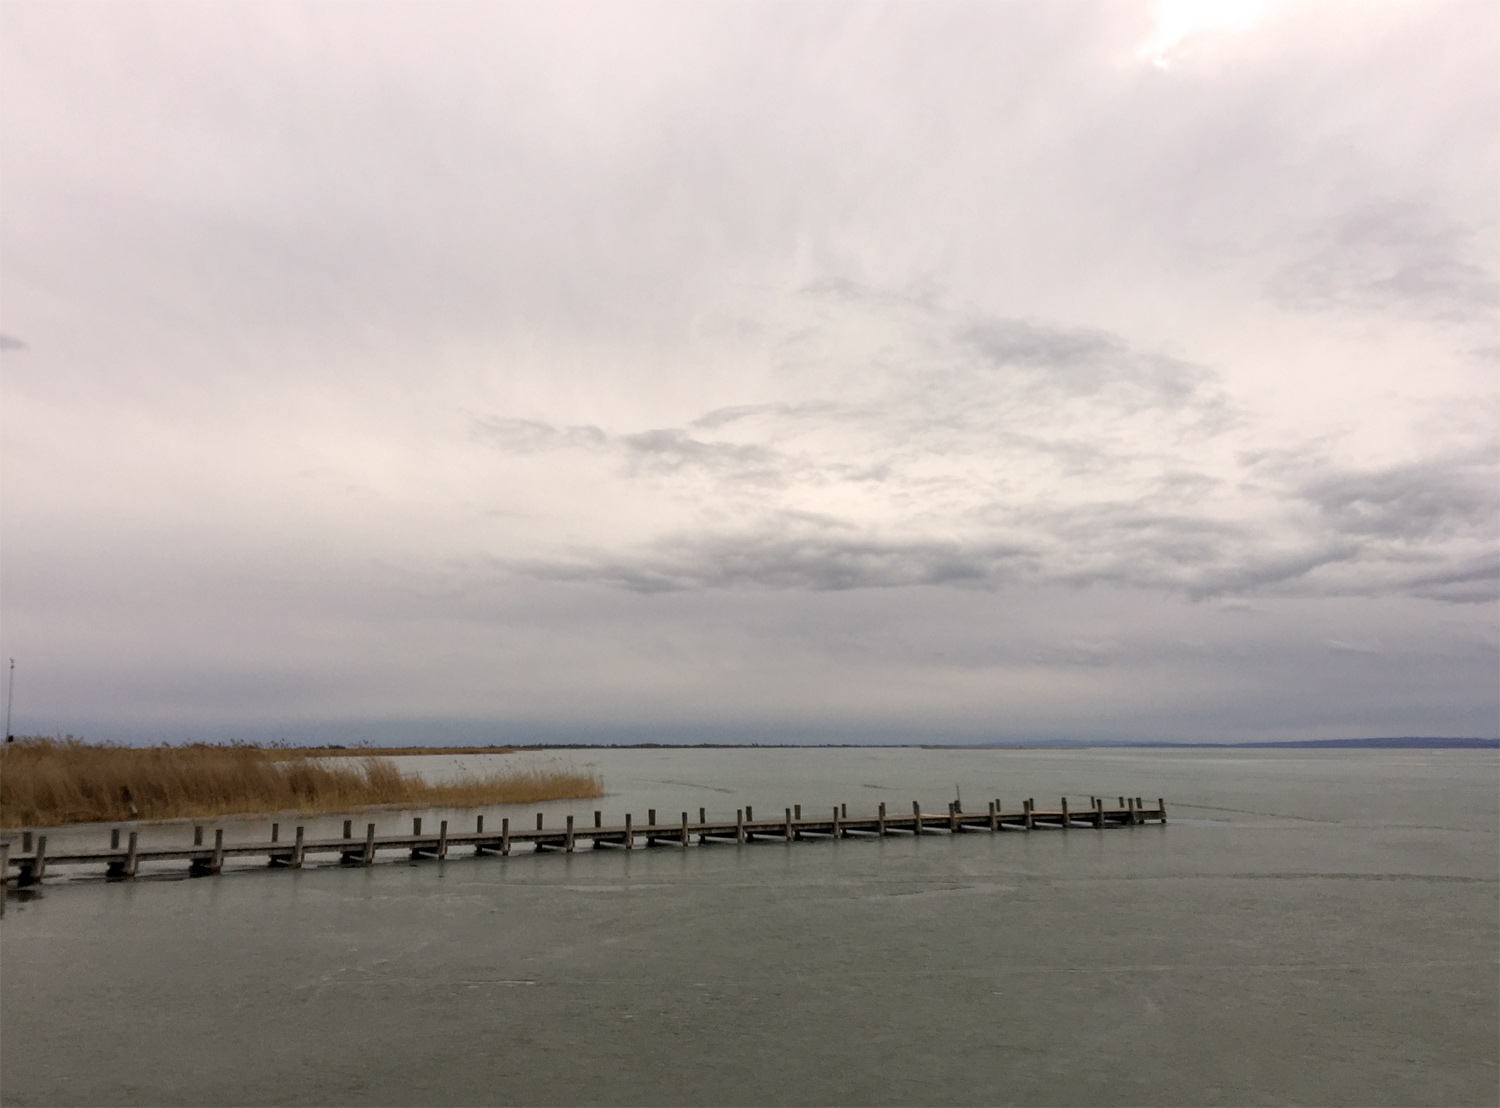 Lake Neusiedl, a winter view from Weiden to Podersdorf